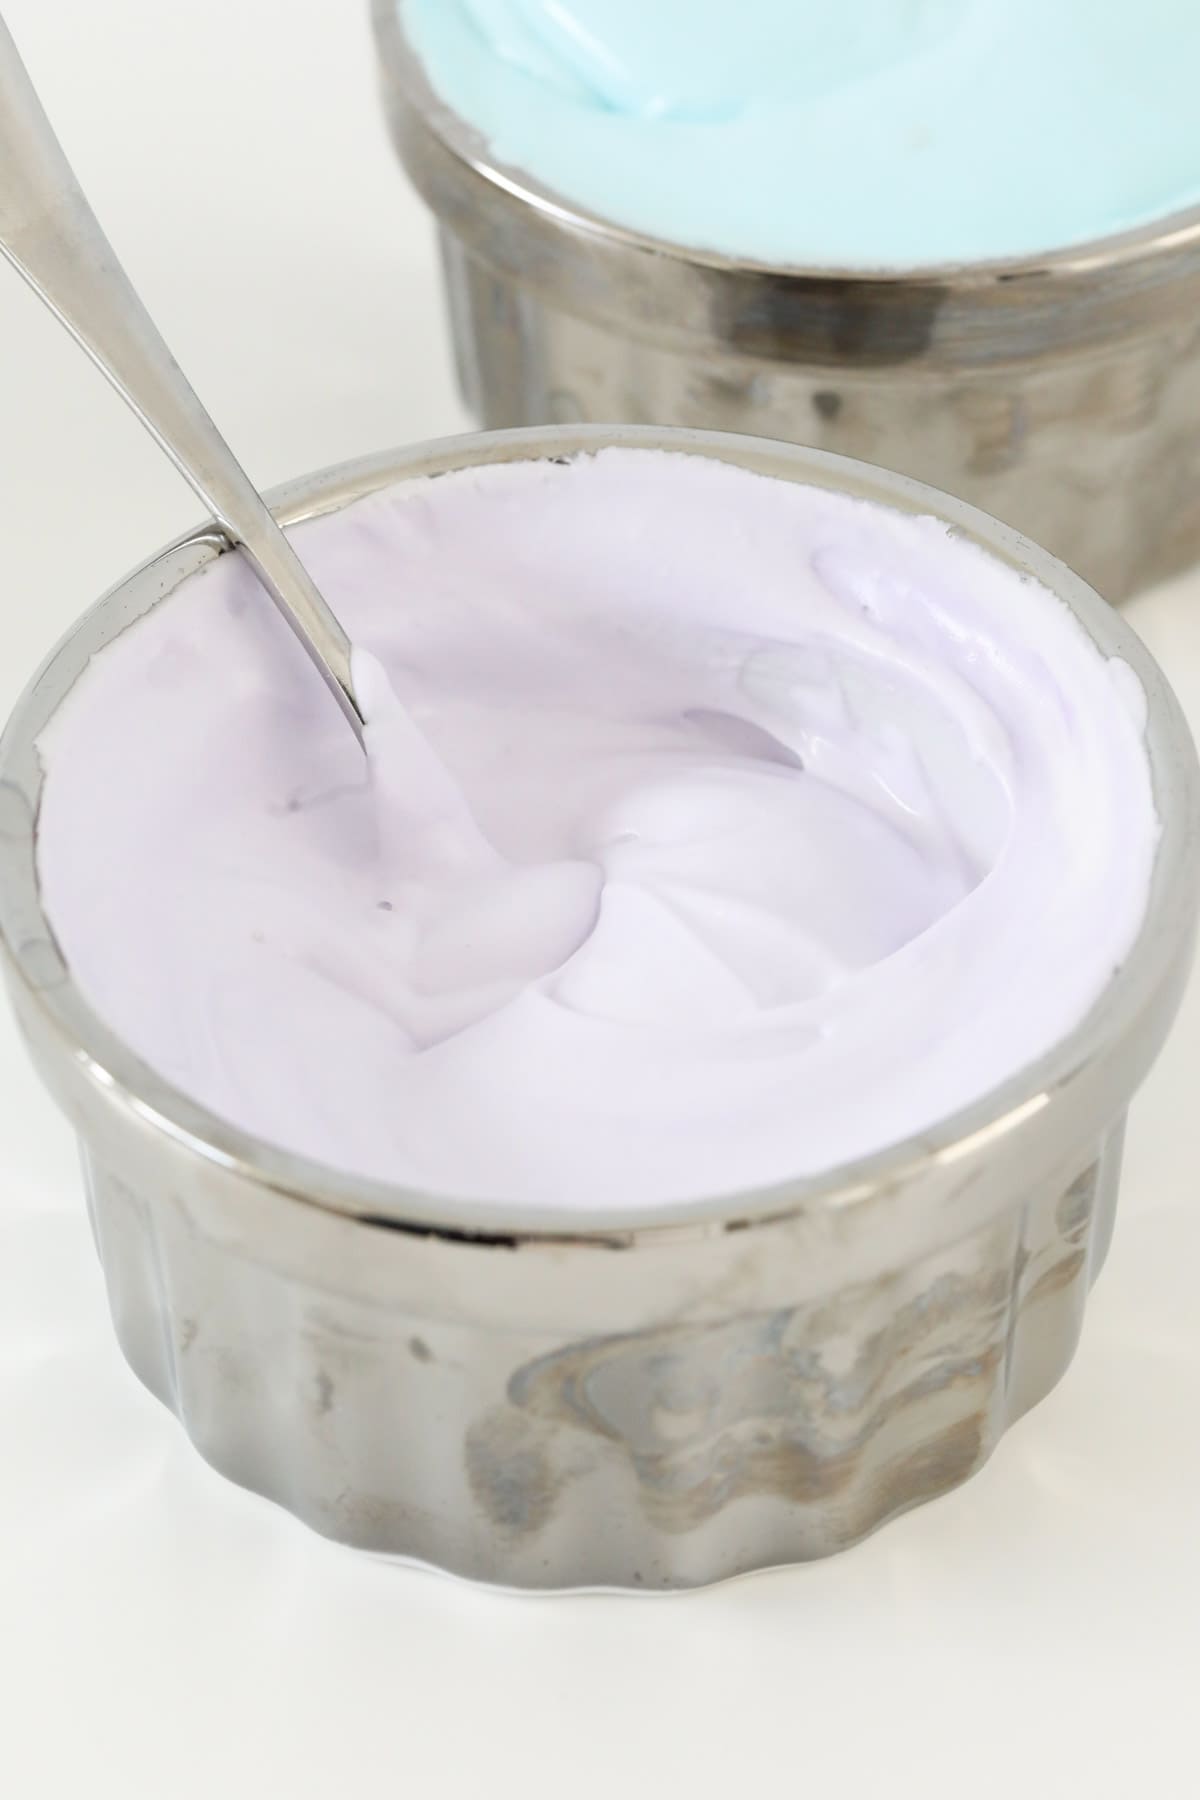 Side view of a bowl of purple royal icing.